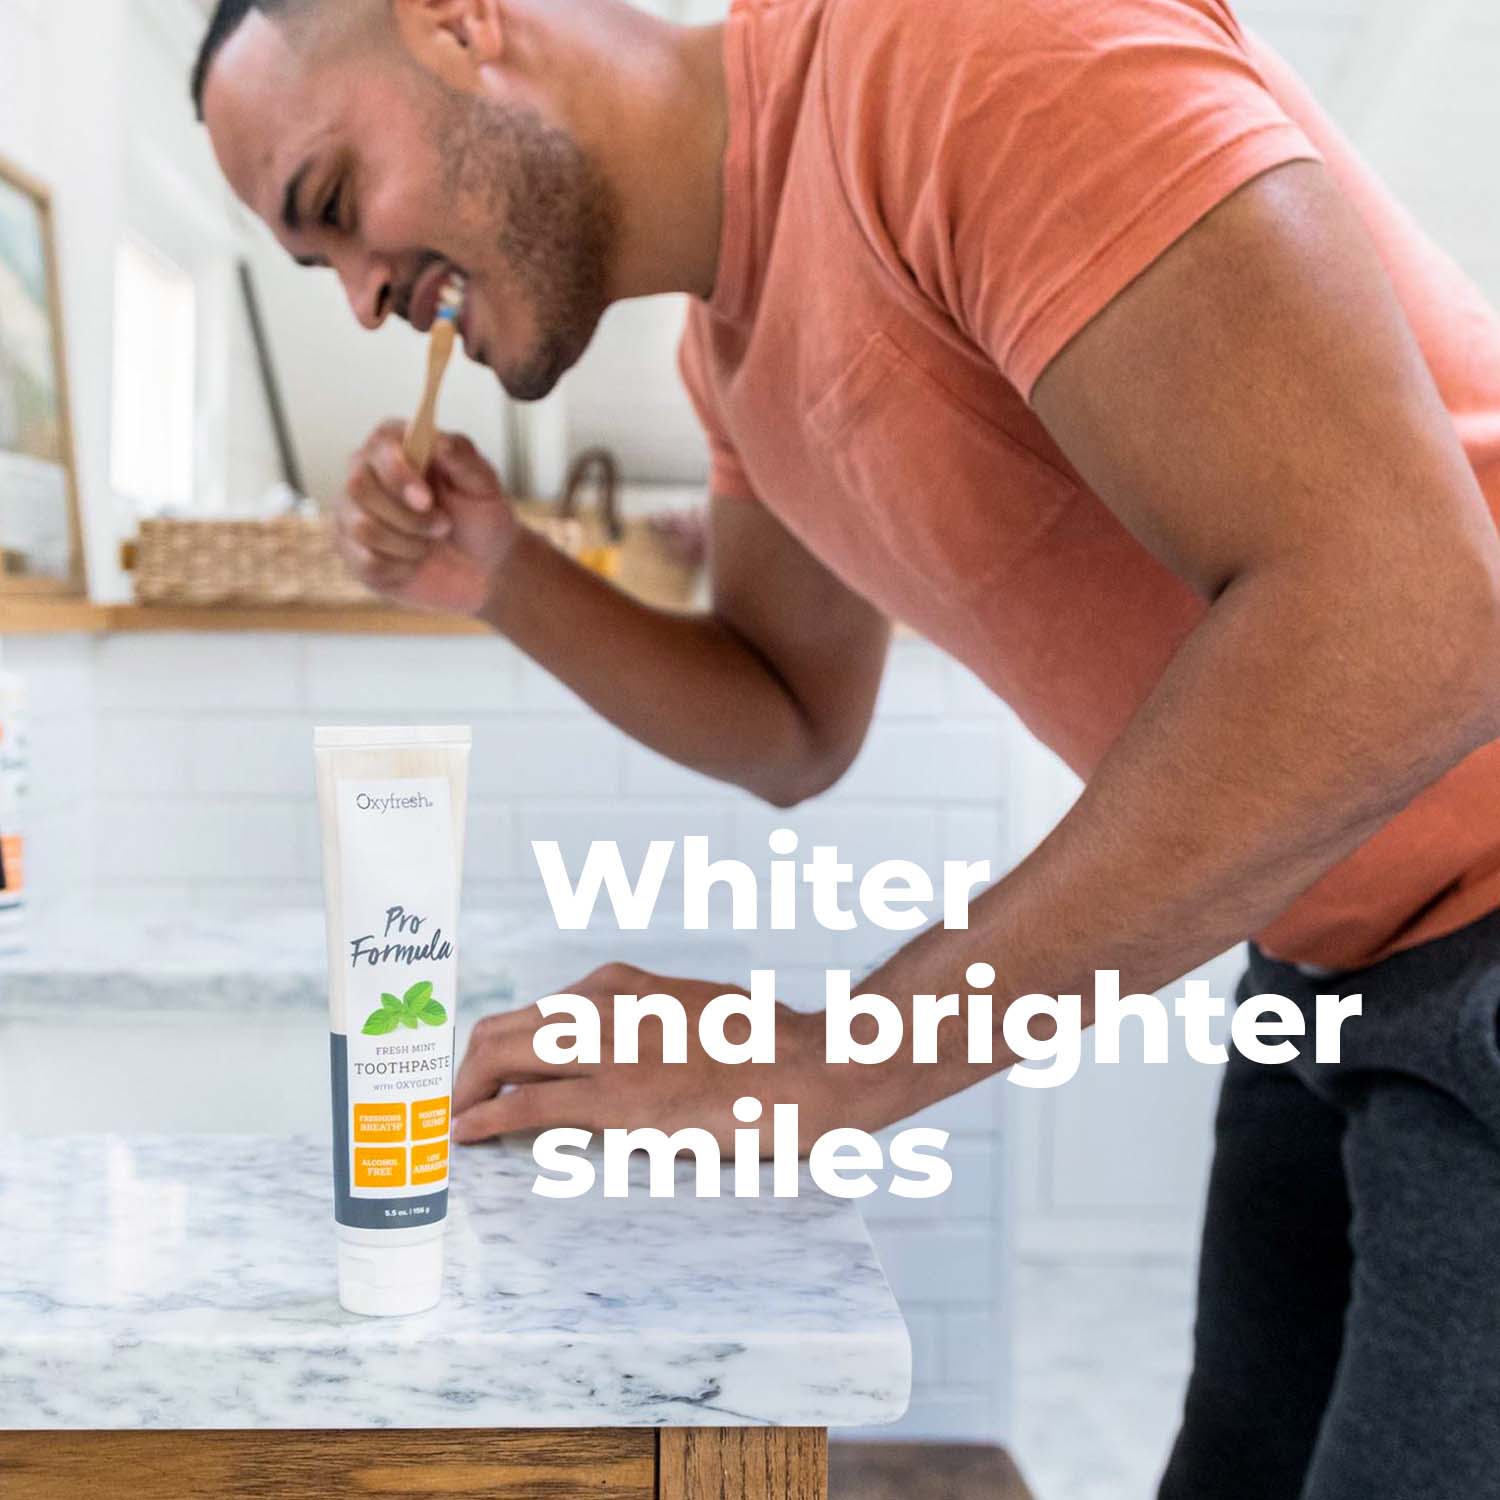 oxyfresh-pro-formula-freshmint-toothpaste-for-whiter-and-brighter-smiles